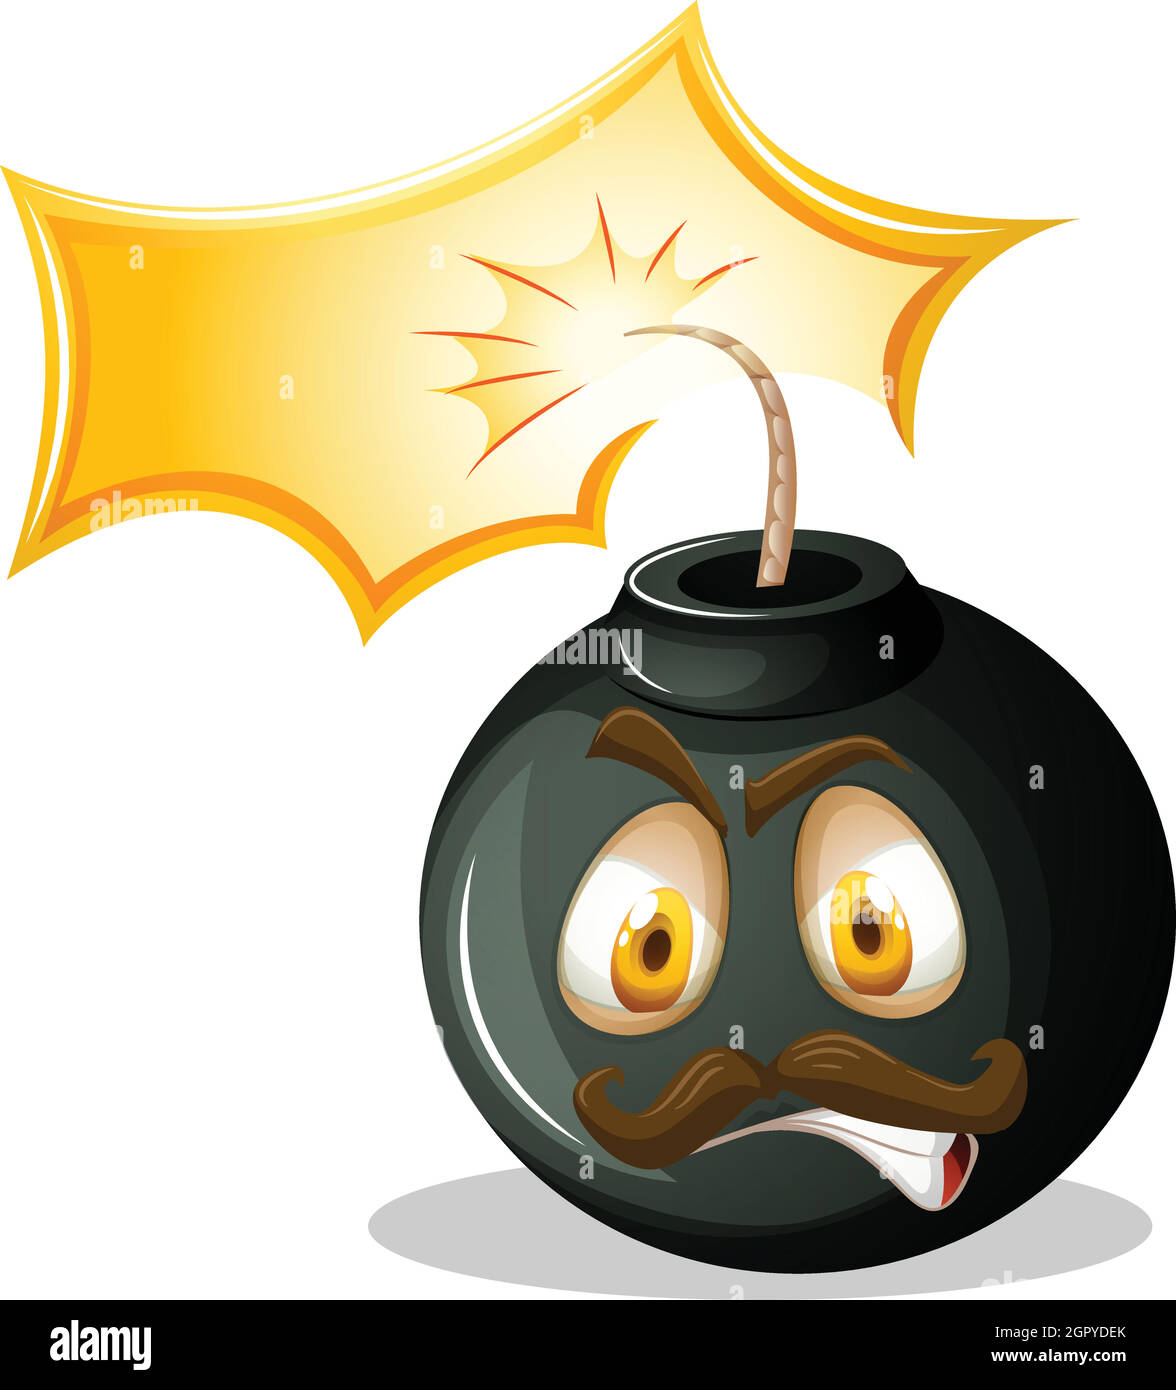 Bomb with angry face Stock Vector